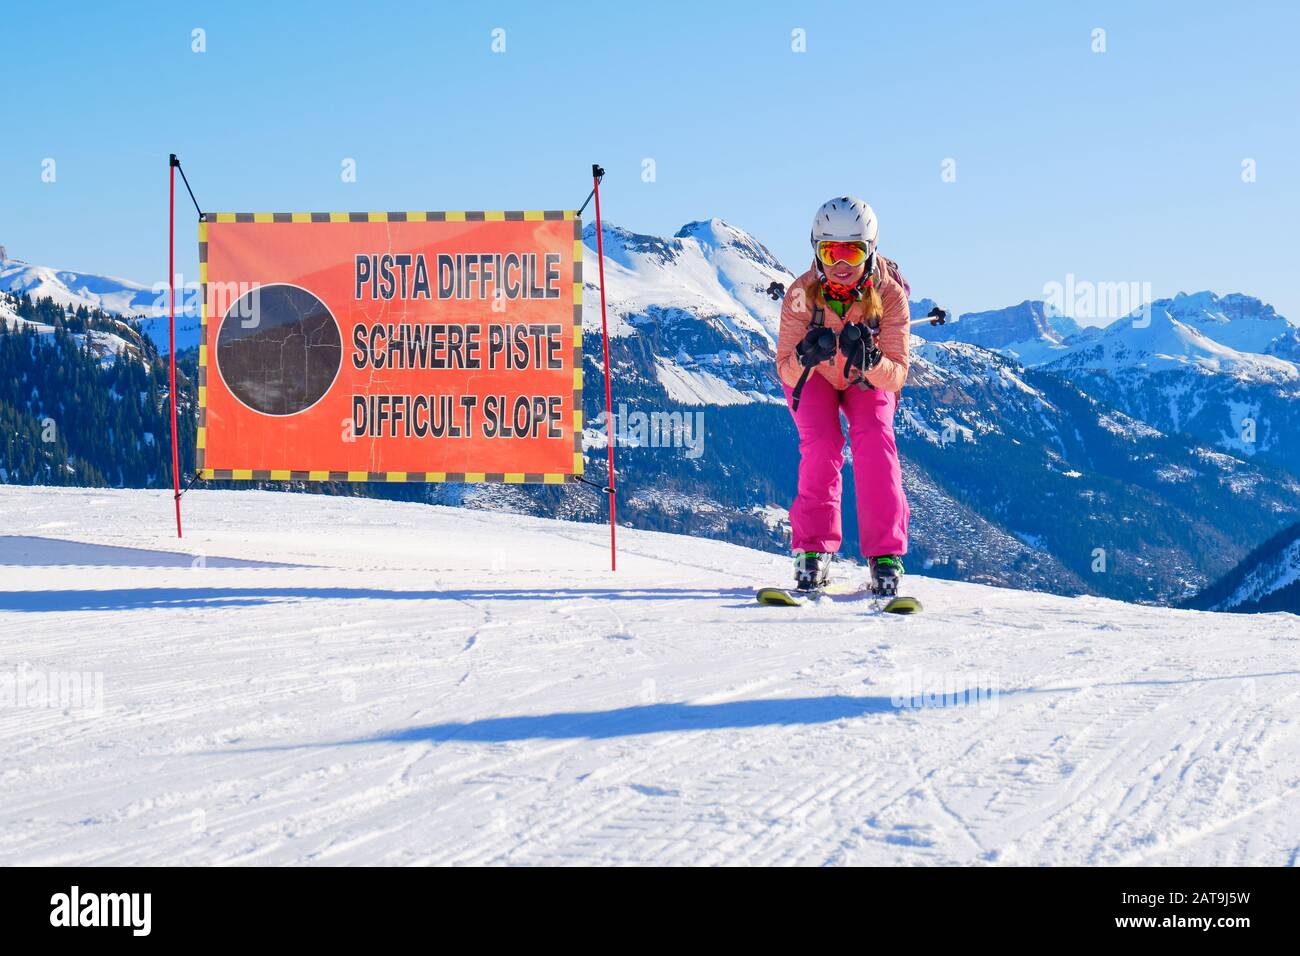 Skier posing in a race style position next to a ski piste sign saying Difficult Slope in German, Italian, and English, in Dolomiti Superski domain, It Stock Photo